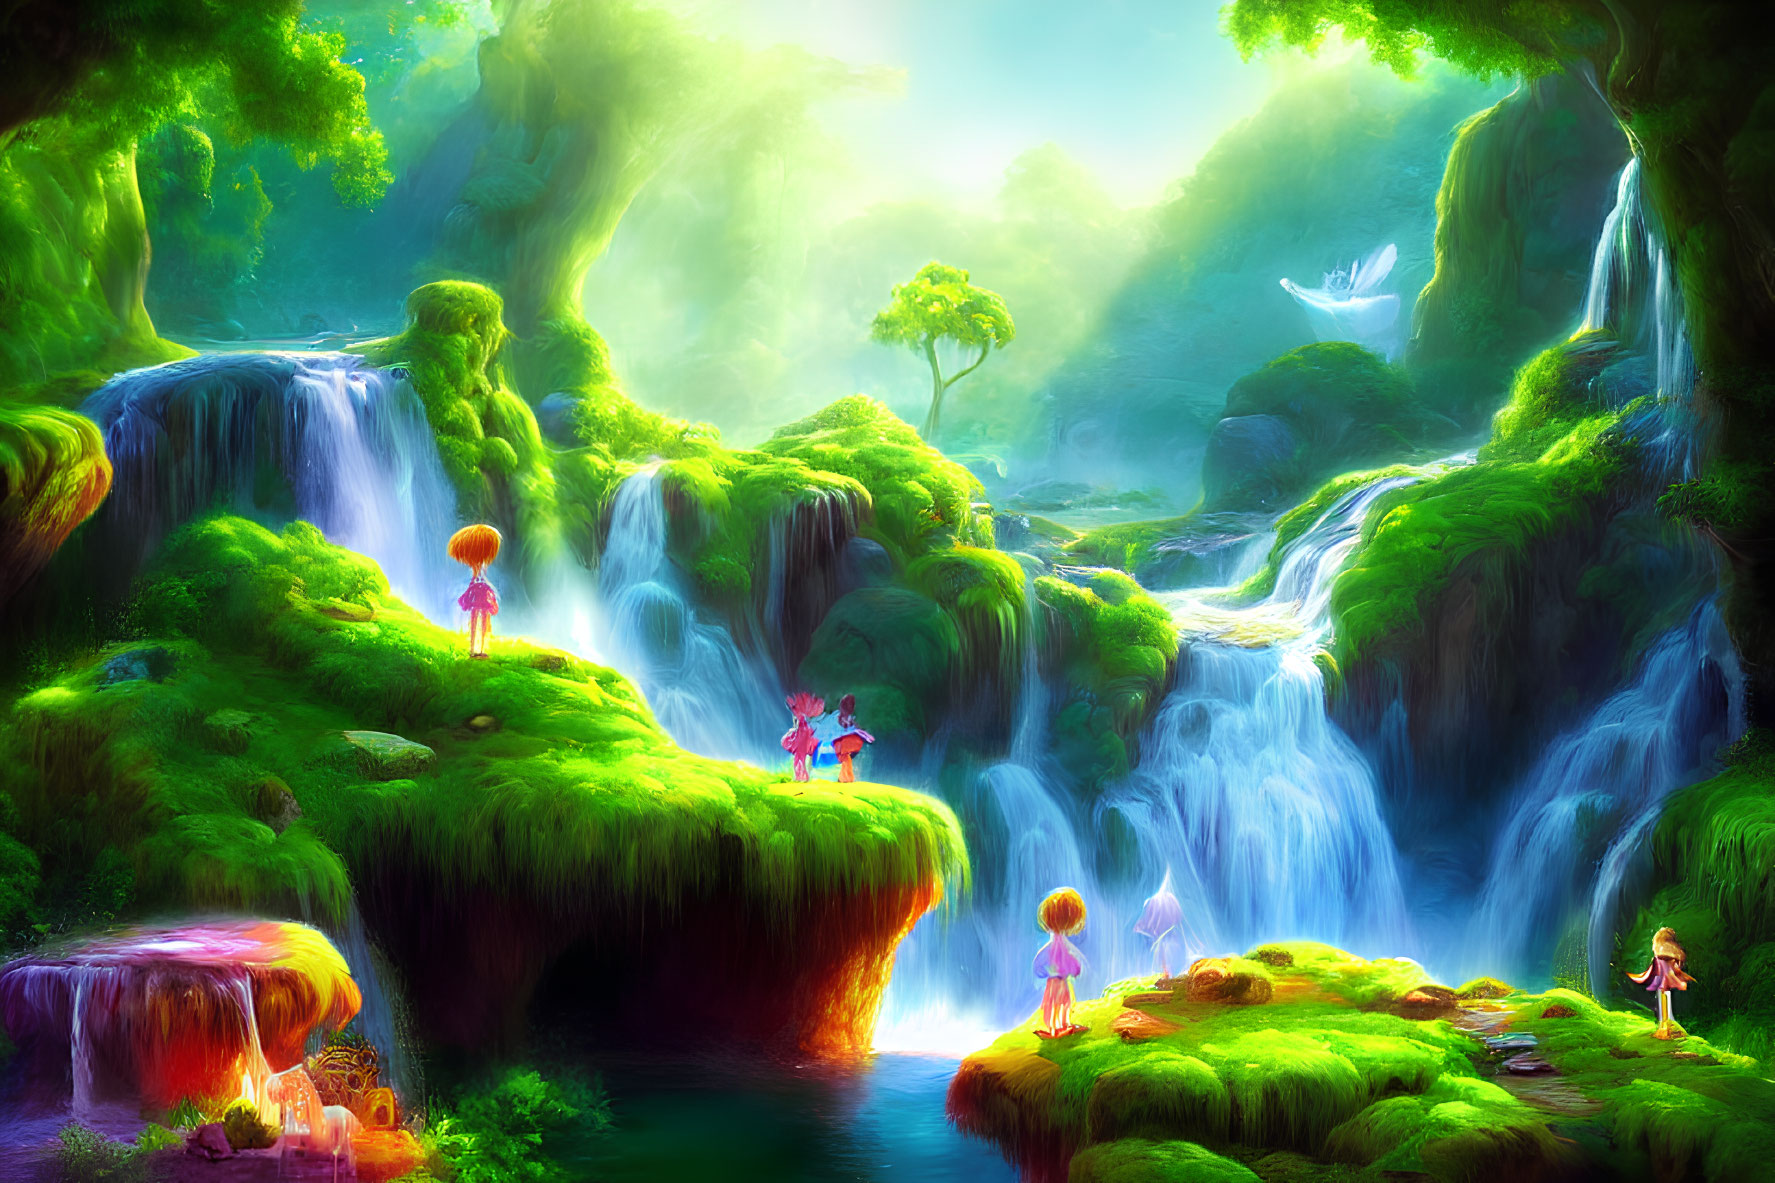 Colorful fantasy landscape with waterfalls, glowing foliage, and whimsical characters